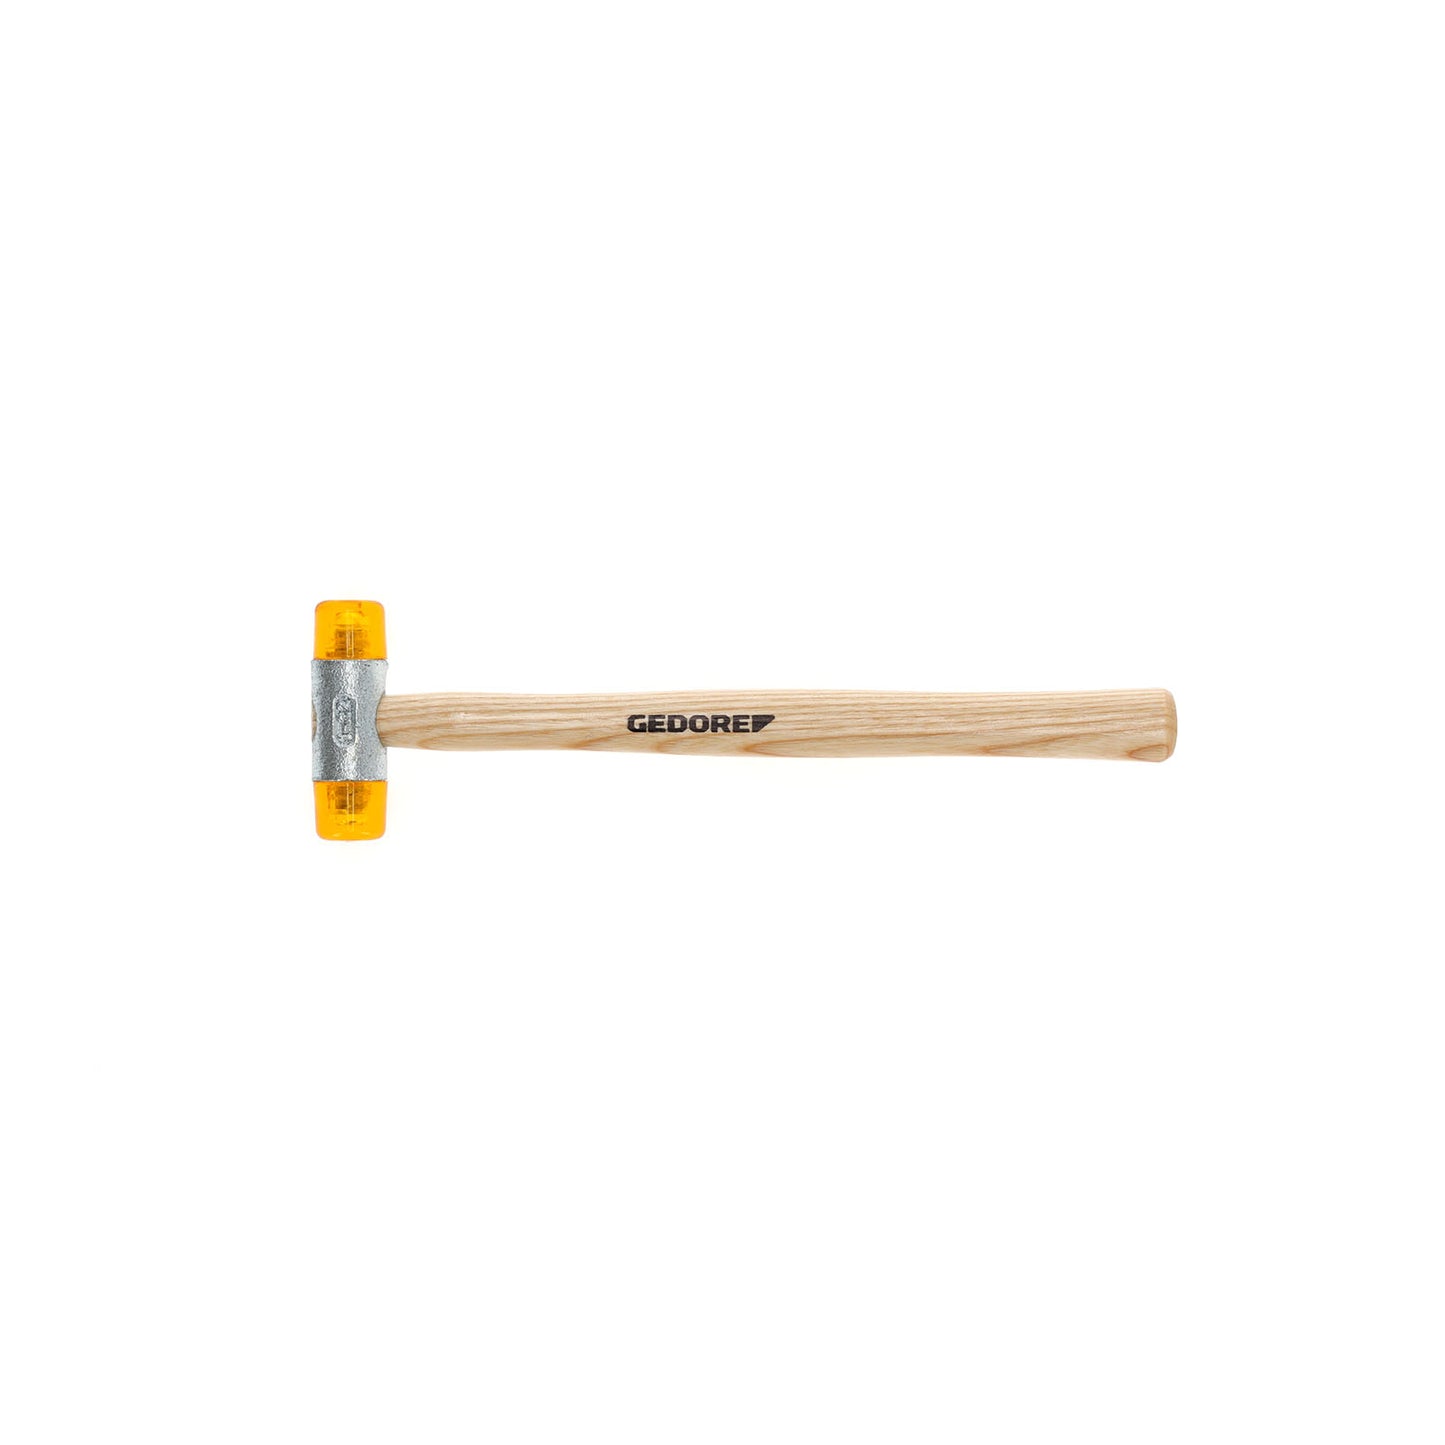 GEDORE 224 E-22 - Plastic jaw hammer d 22mm (8821270)